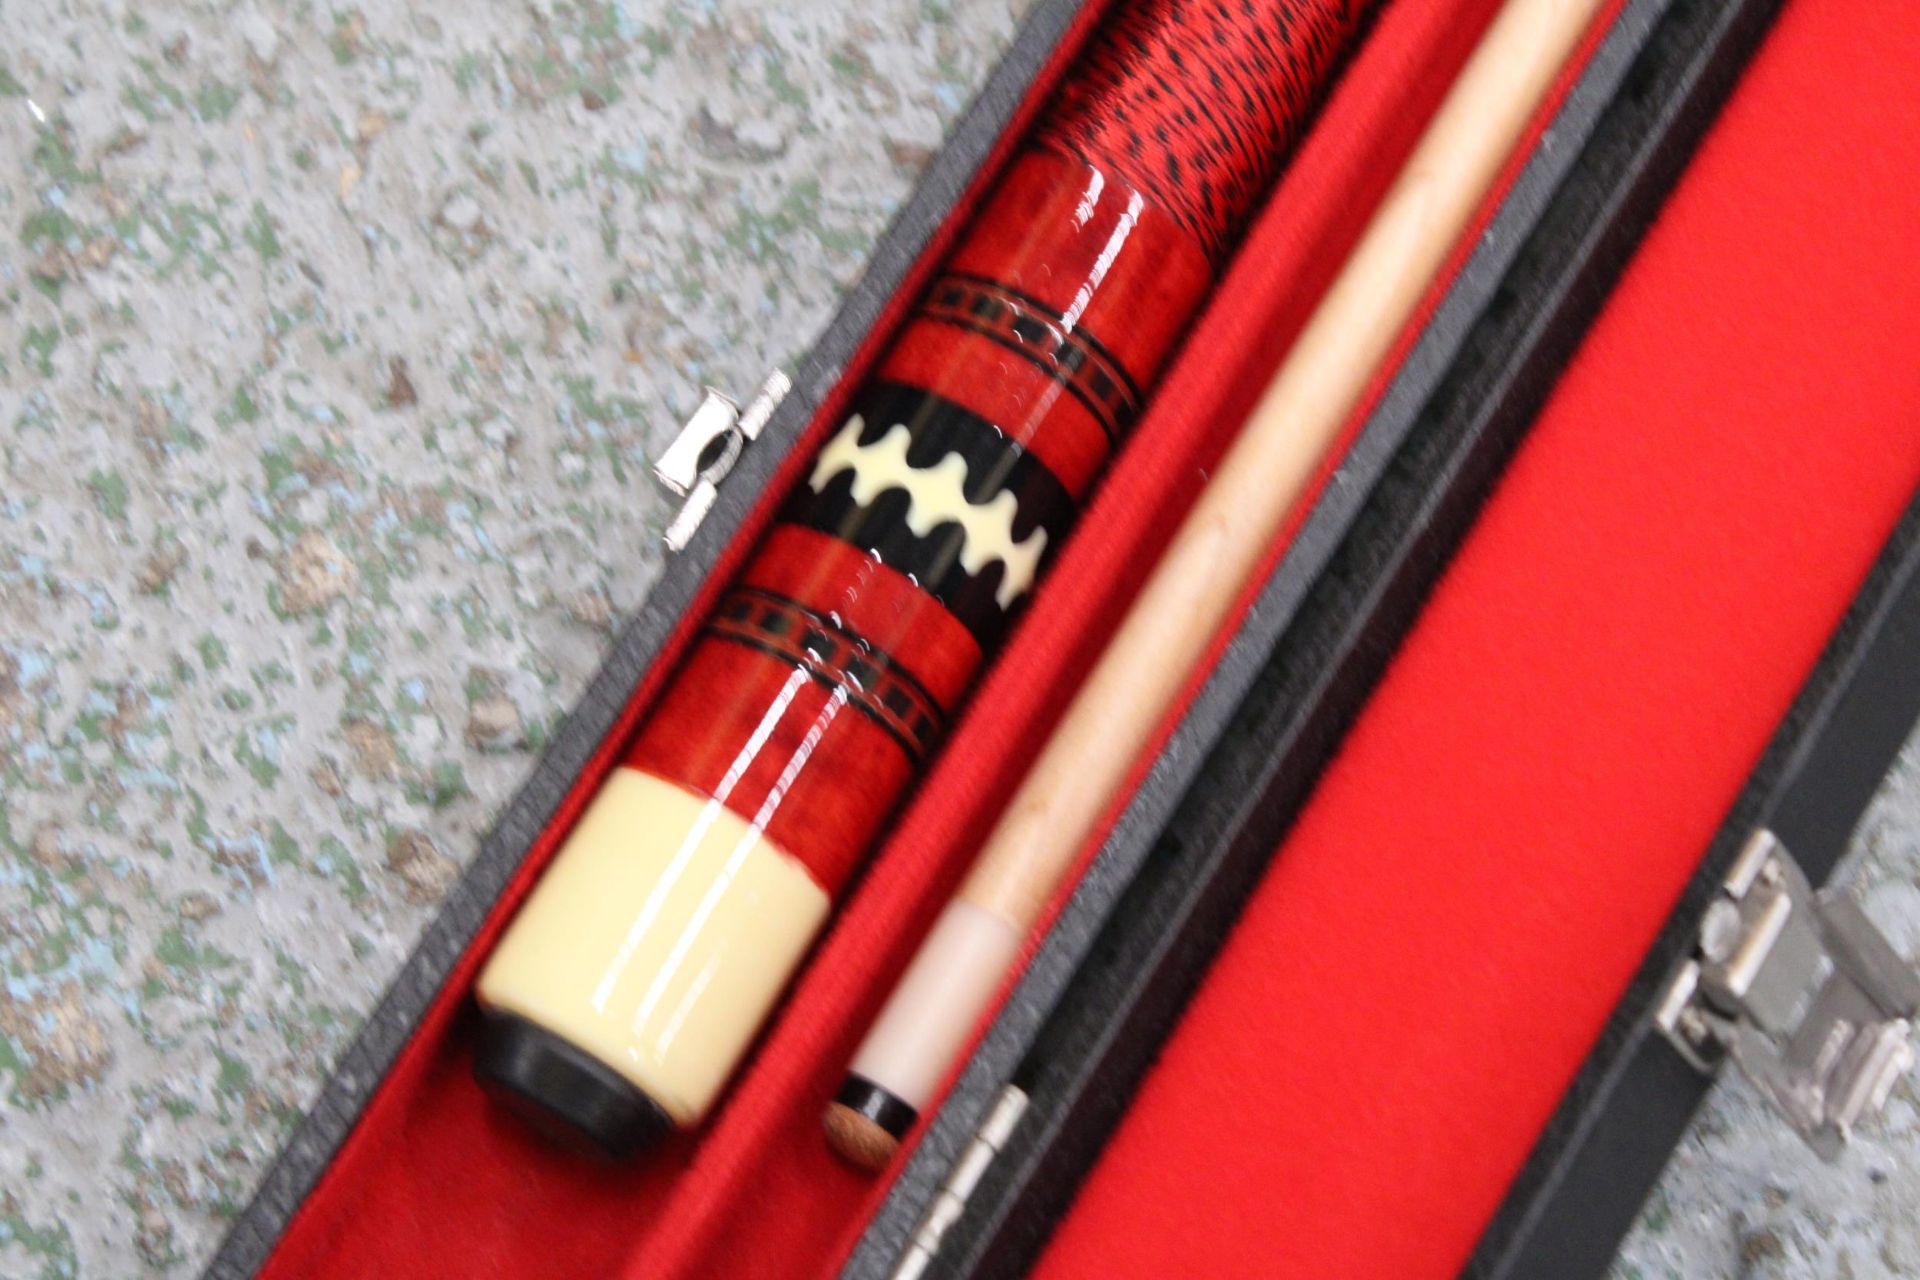 A RILEY SNOOKER/POOL CUE IN A HARD CASE - Image 2 of 4